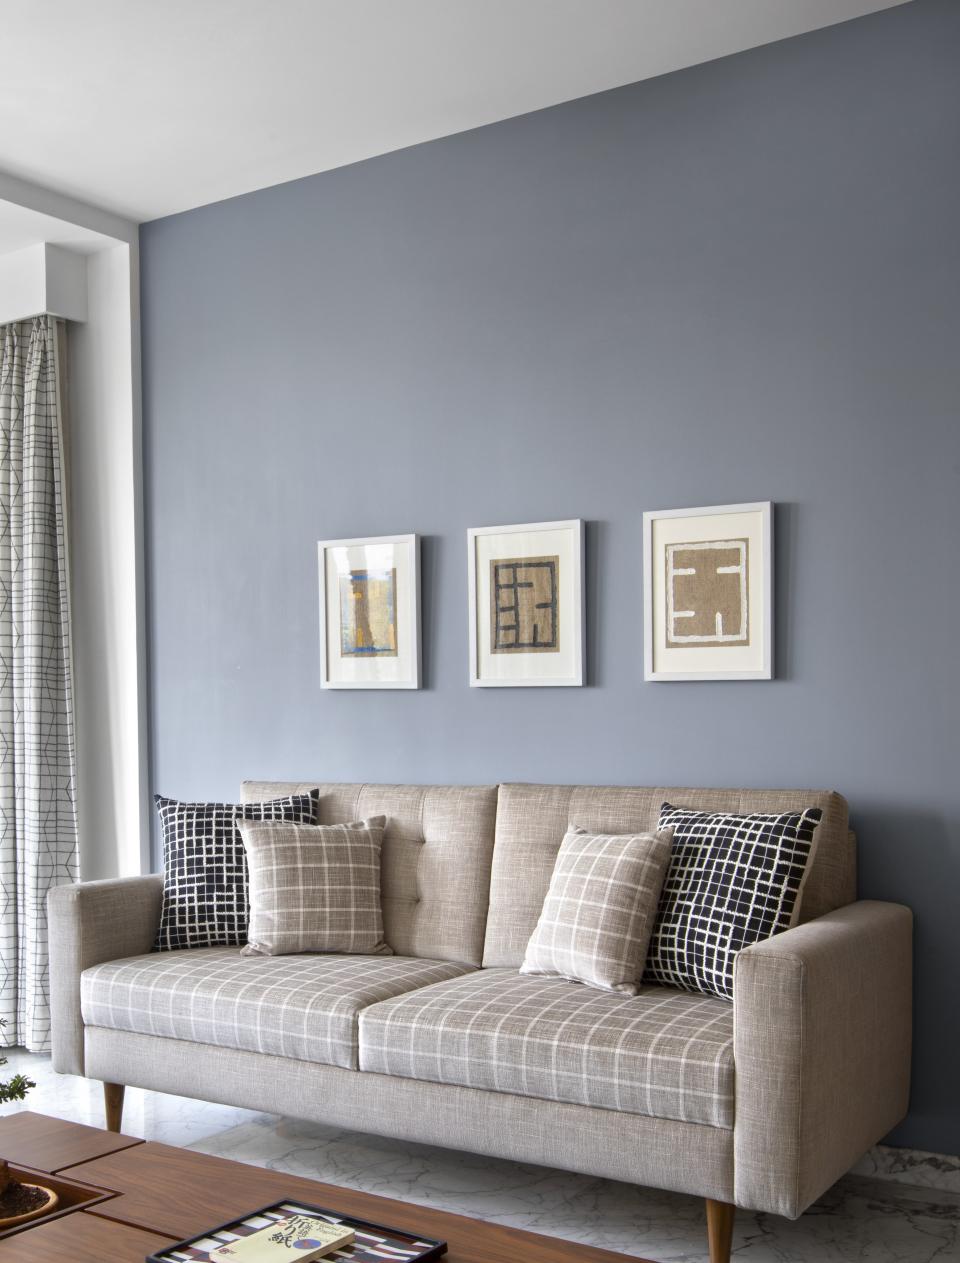 A living room with light blue walls and a grey couch